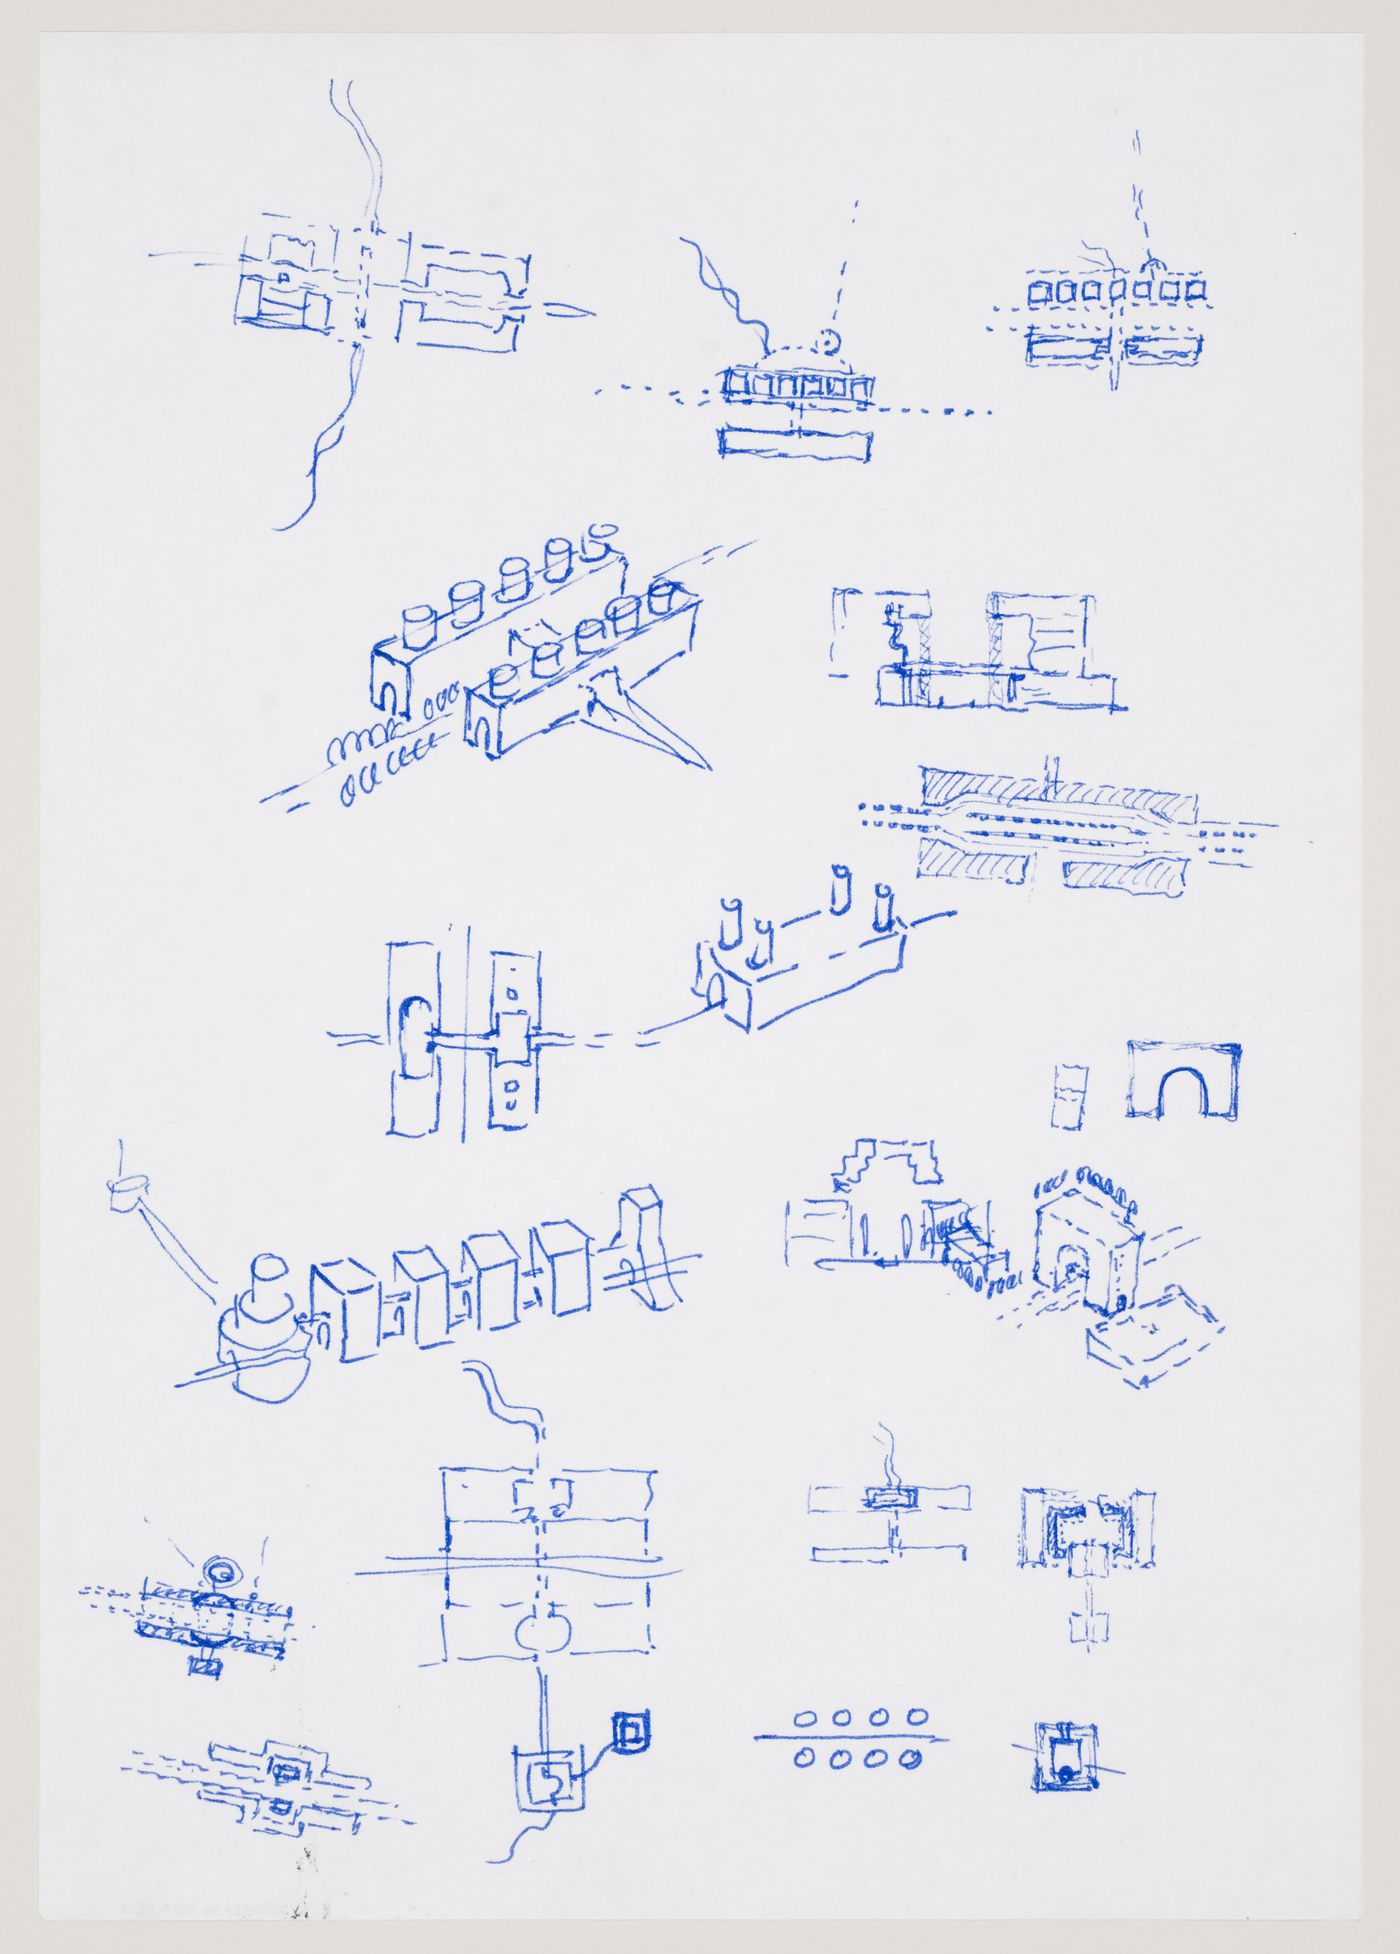 Administrative and Business Centre, Florence, Italy: sketches